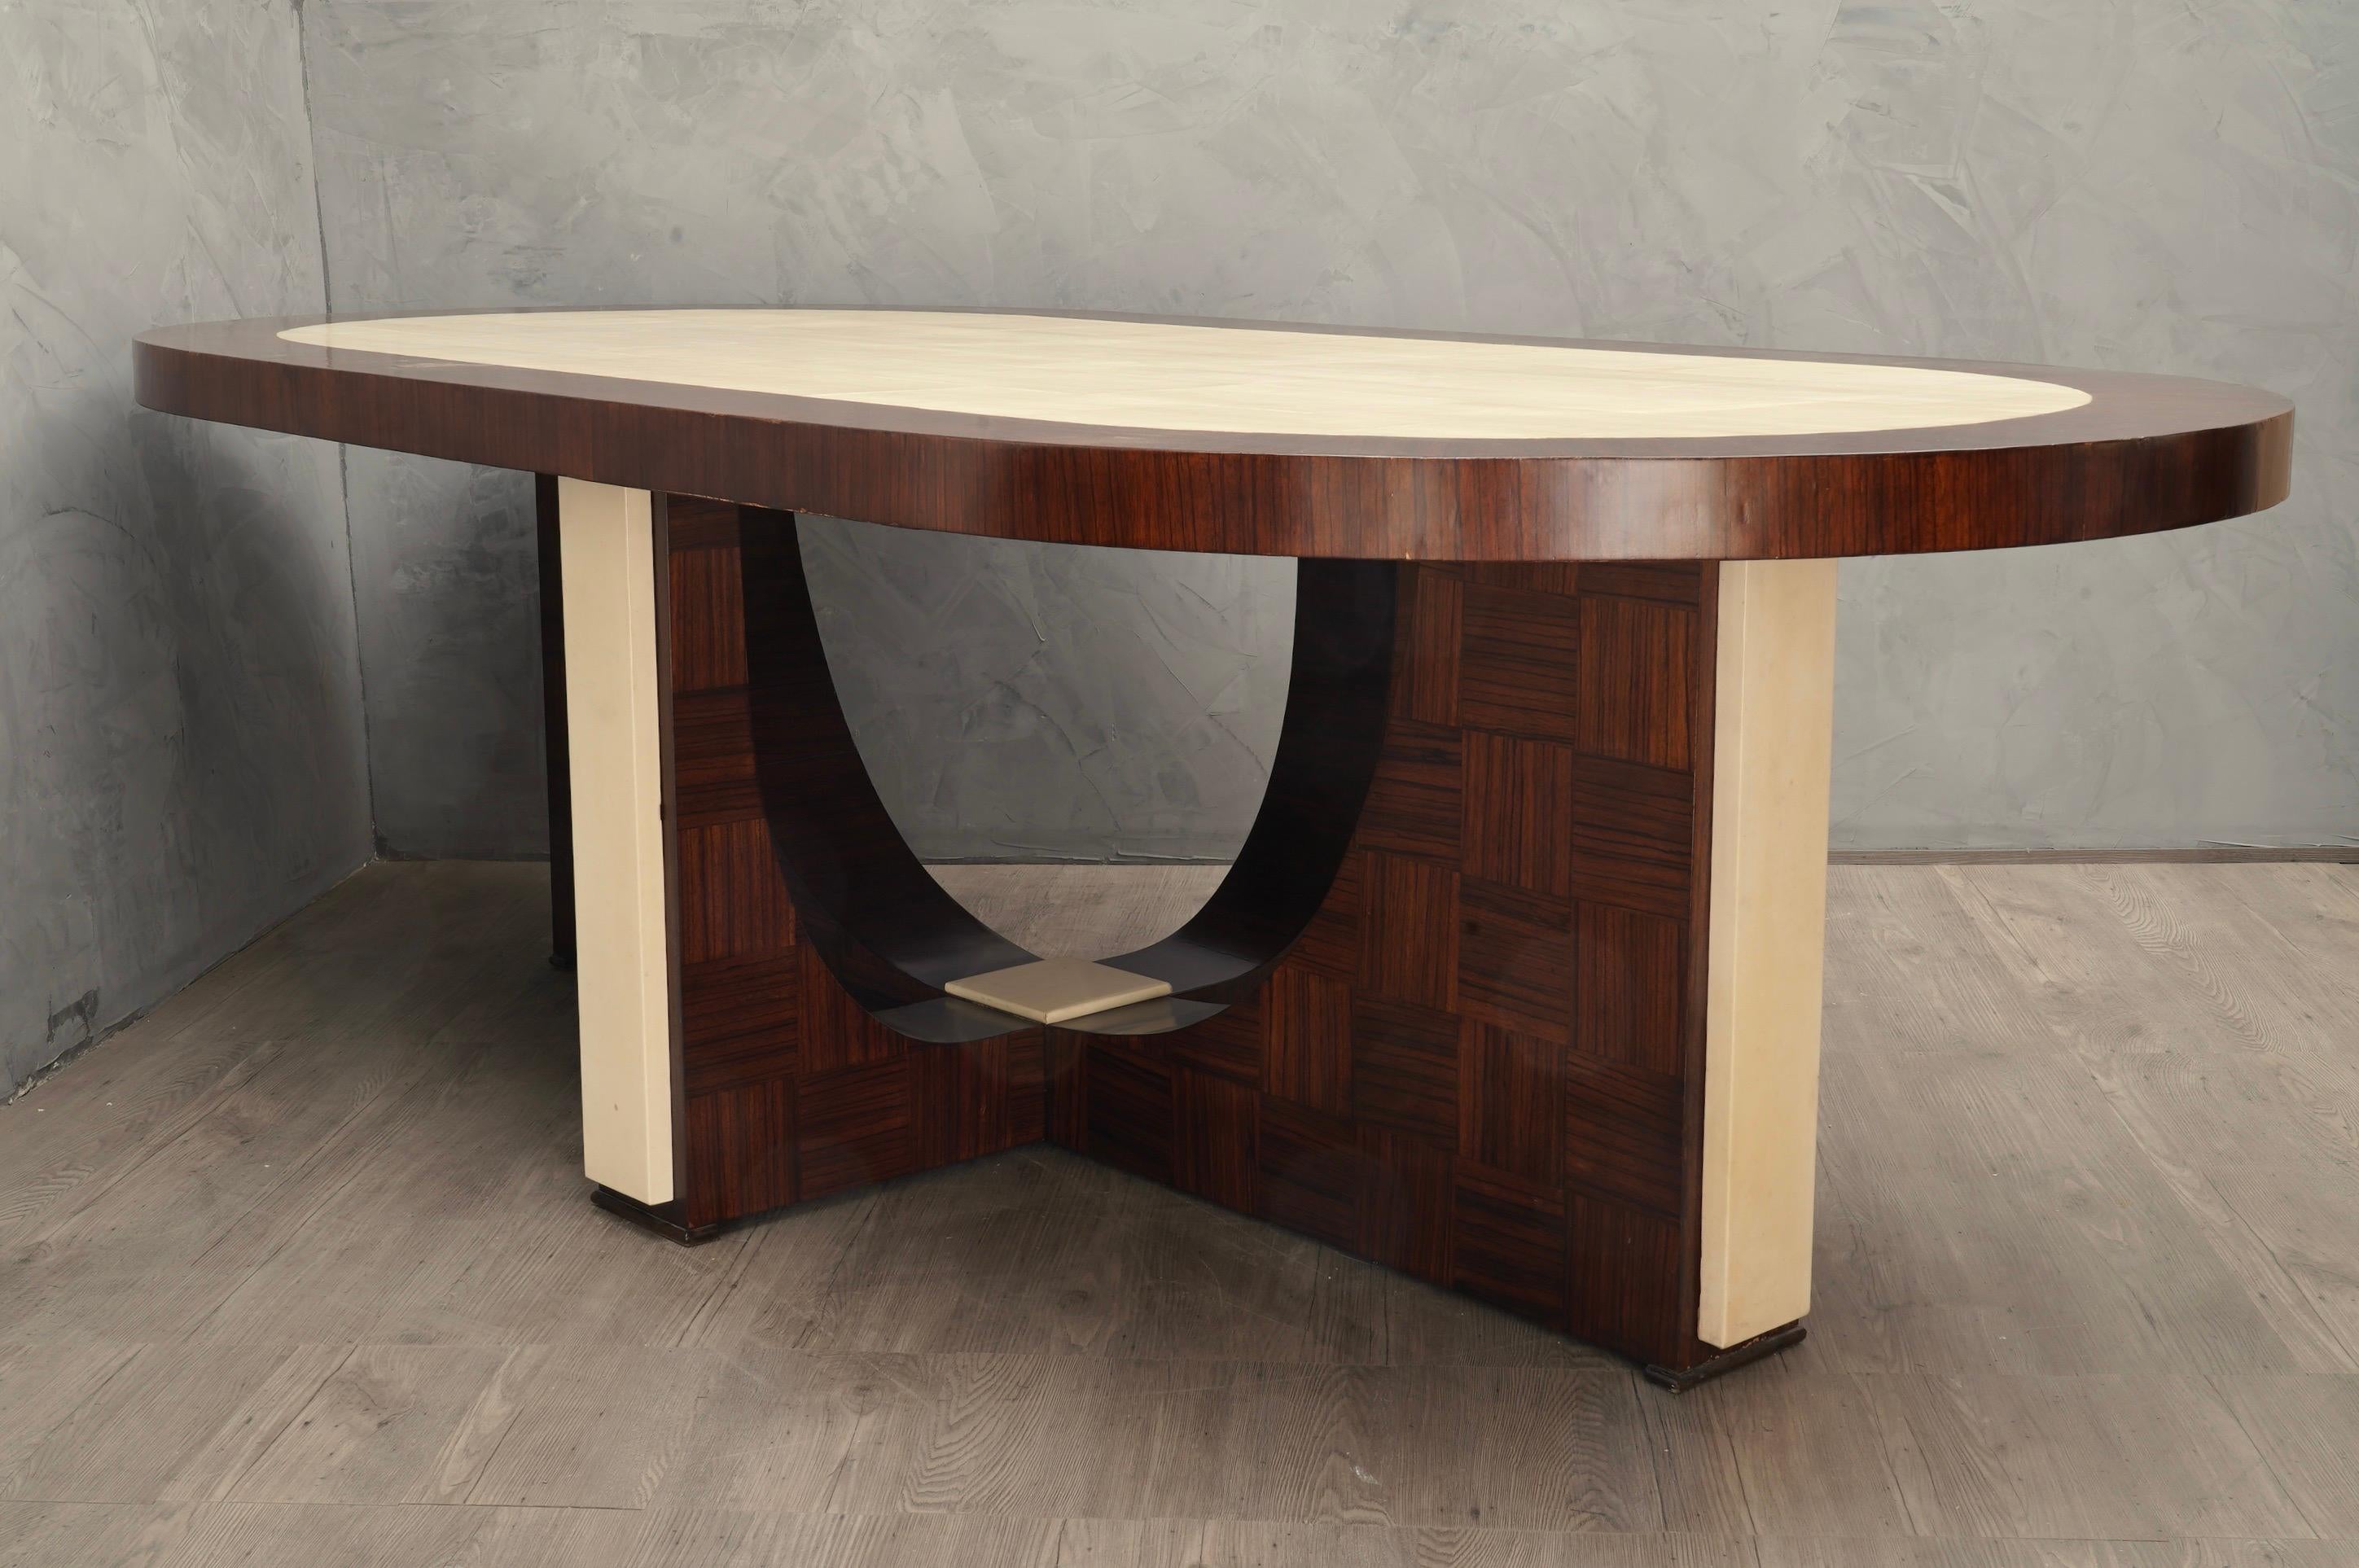 Midcentury Oval Zebrano Wood and Goatskin Italian Table, 1950 In Good Condition For Sale In Rome, IT